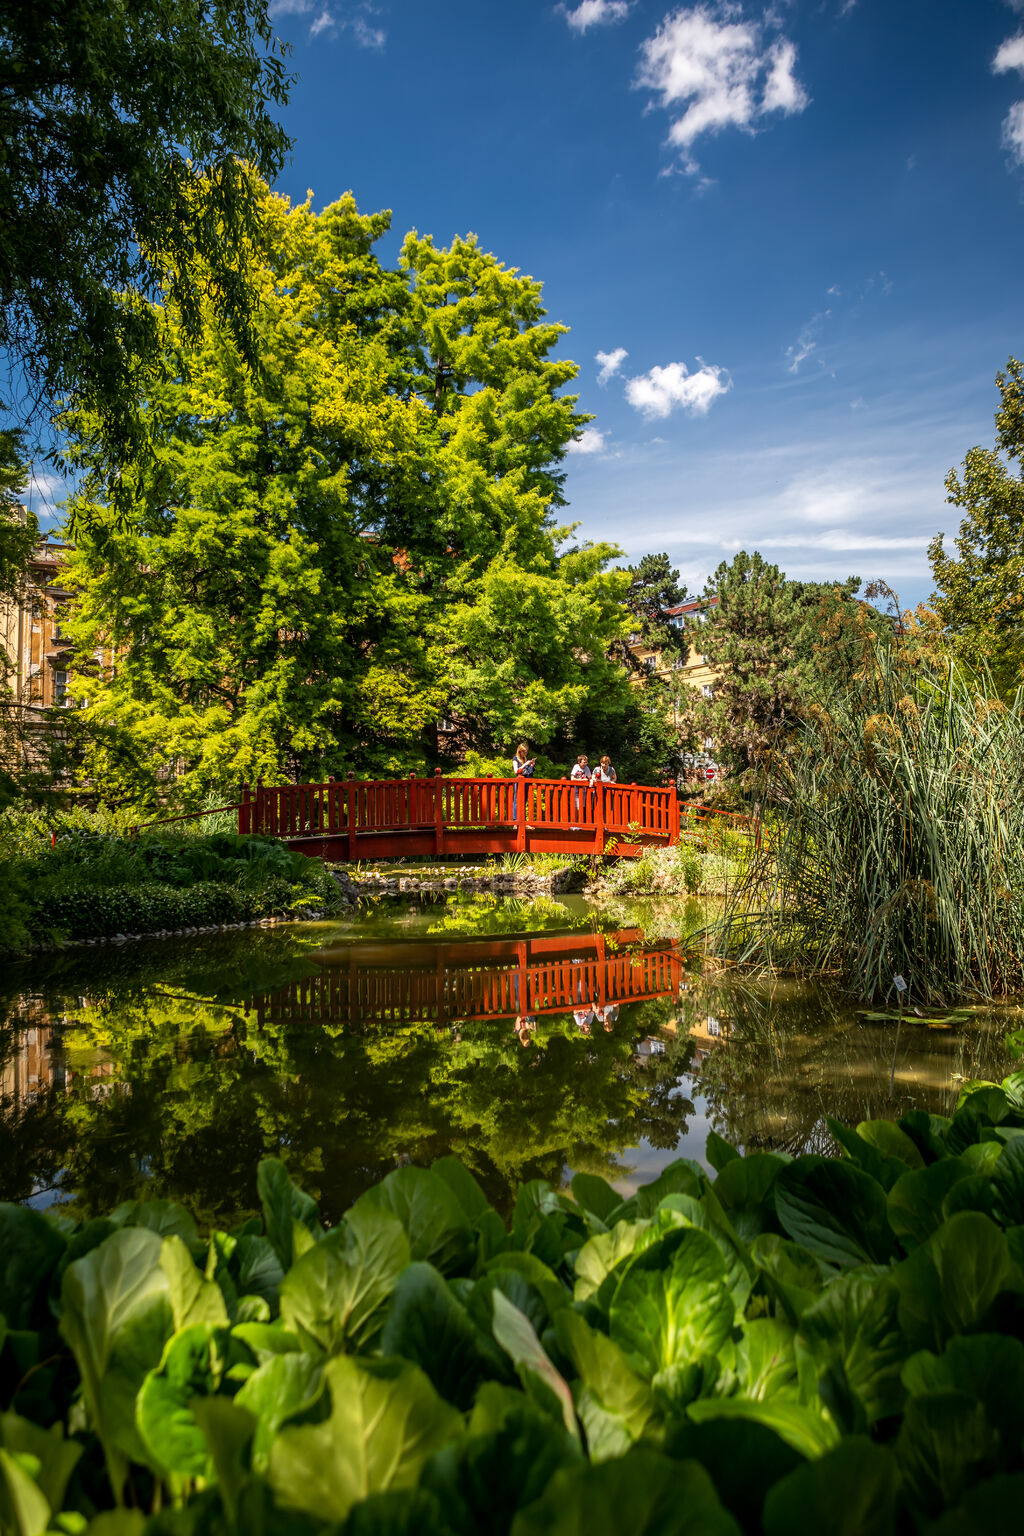 9 parks in Zagreb perfect for spring days